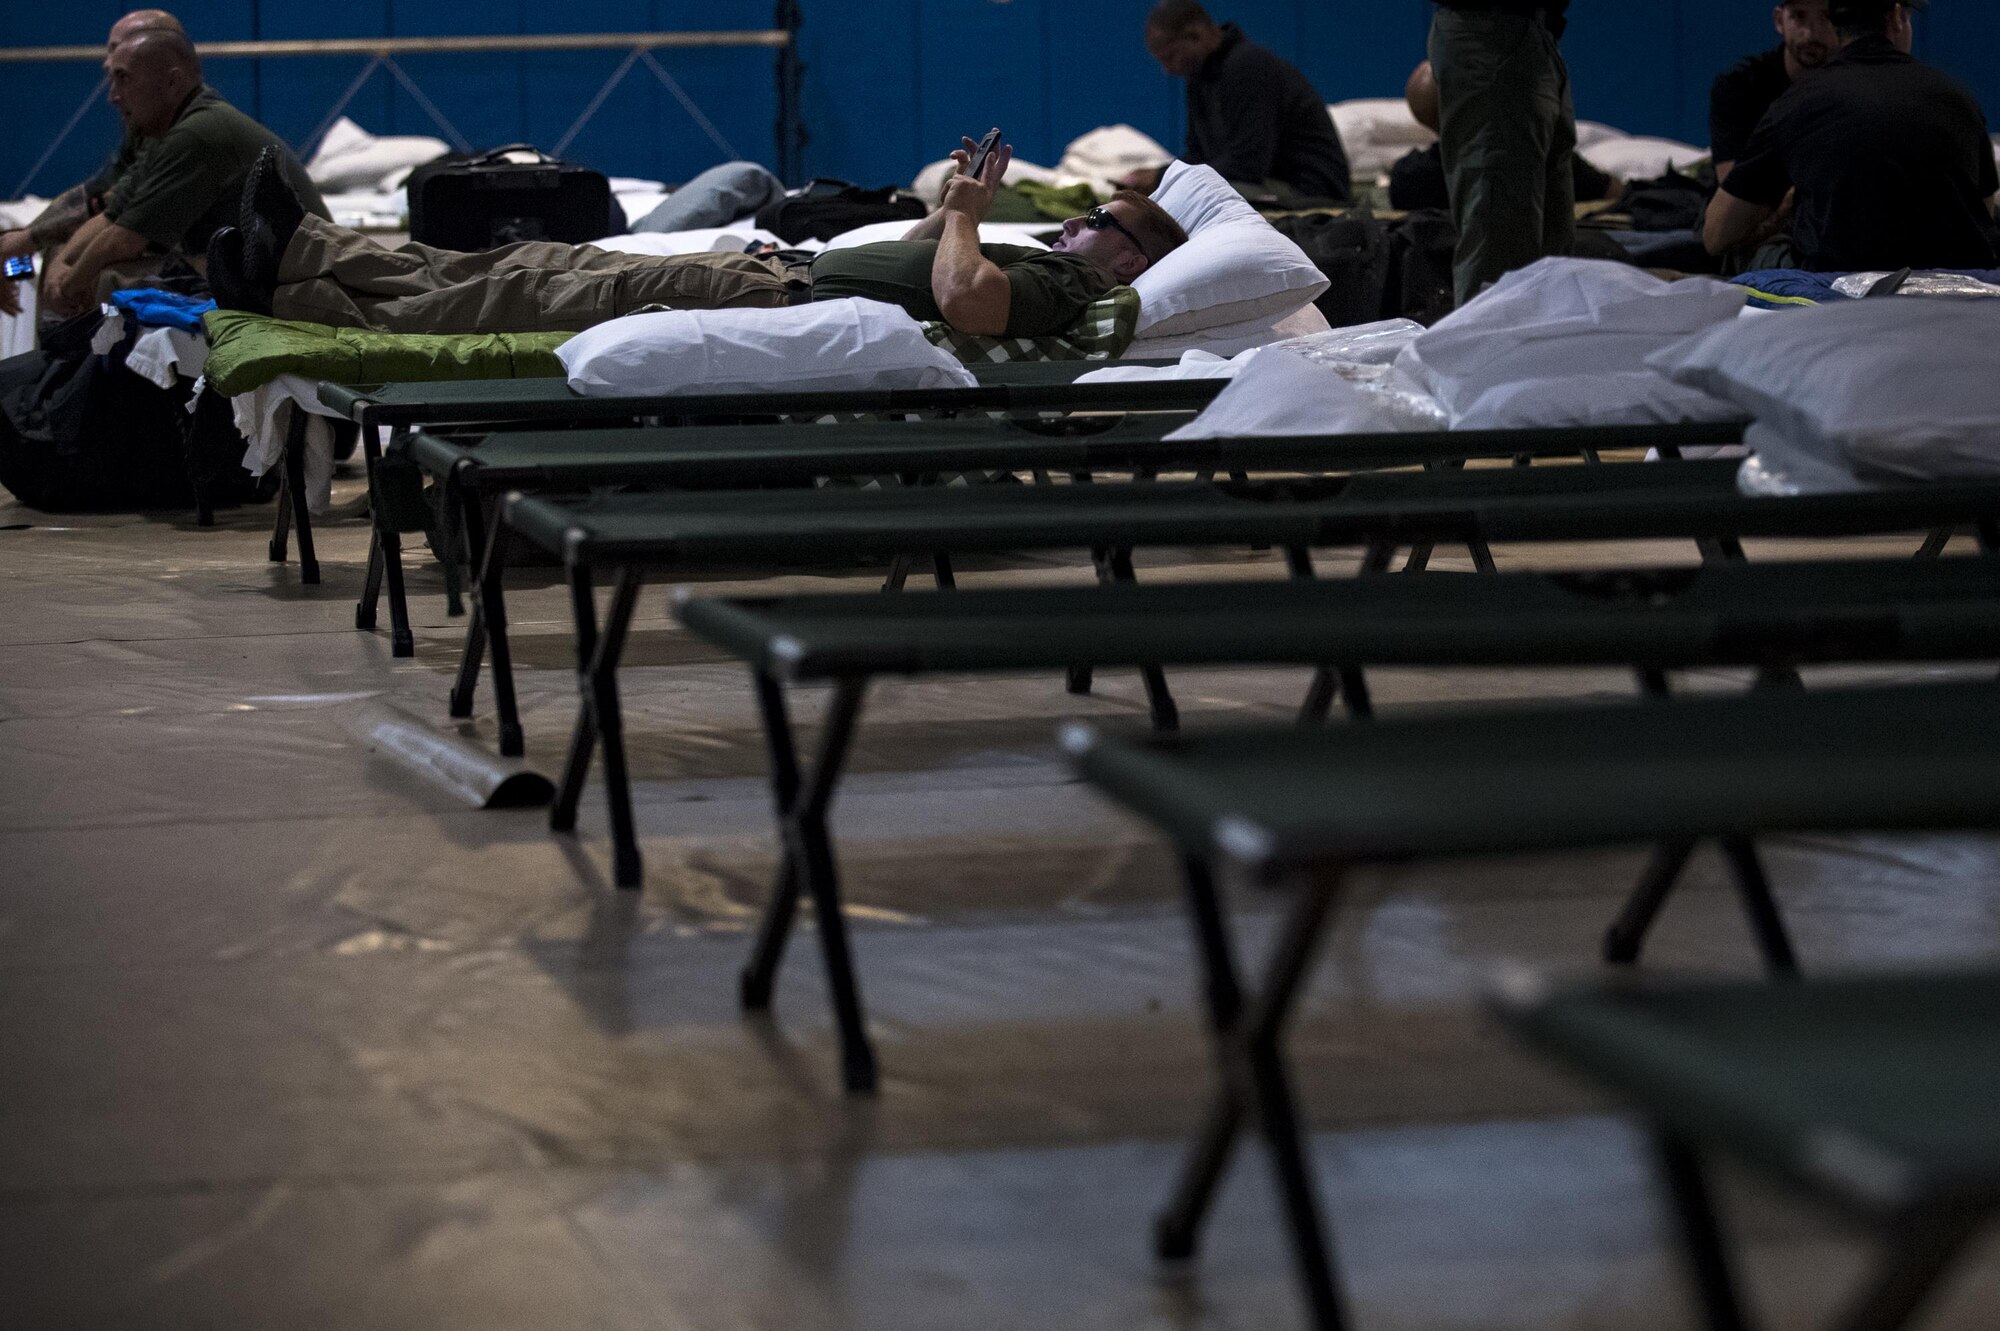 Members from various federal law enforcement agencies rest and relax before deploying to areas affected by Hurricane Irma, Sept. 10, 2017, at Moody Air Force Base, Ga. Moody Air Force Base hosted approximately 400 members from 14 different federal agencies who will deploy to conduct security or search and rescue missions in areas effected by Hurricane Irma. (U.S. Air Force photo by Airman 1st Class Daniel Snider)